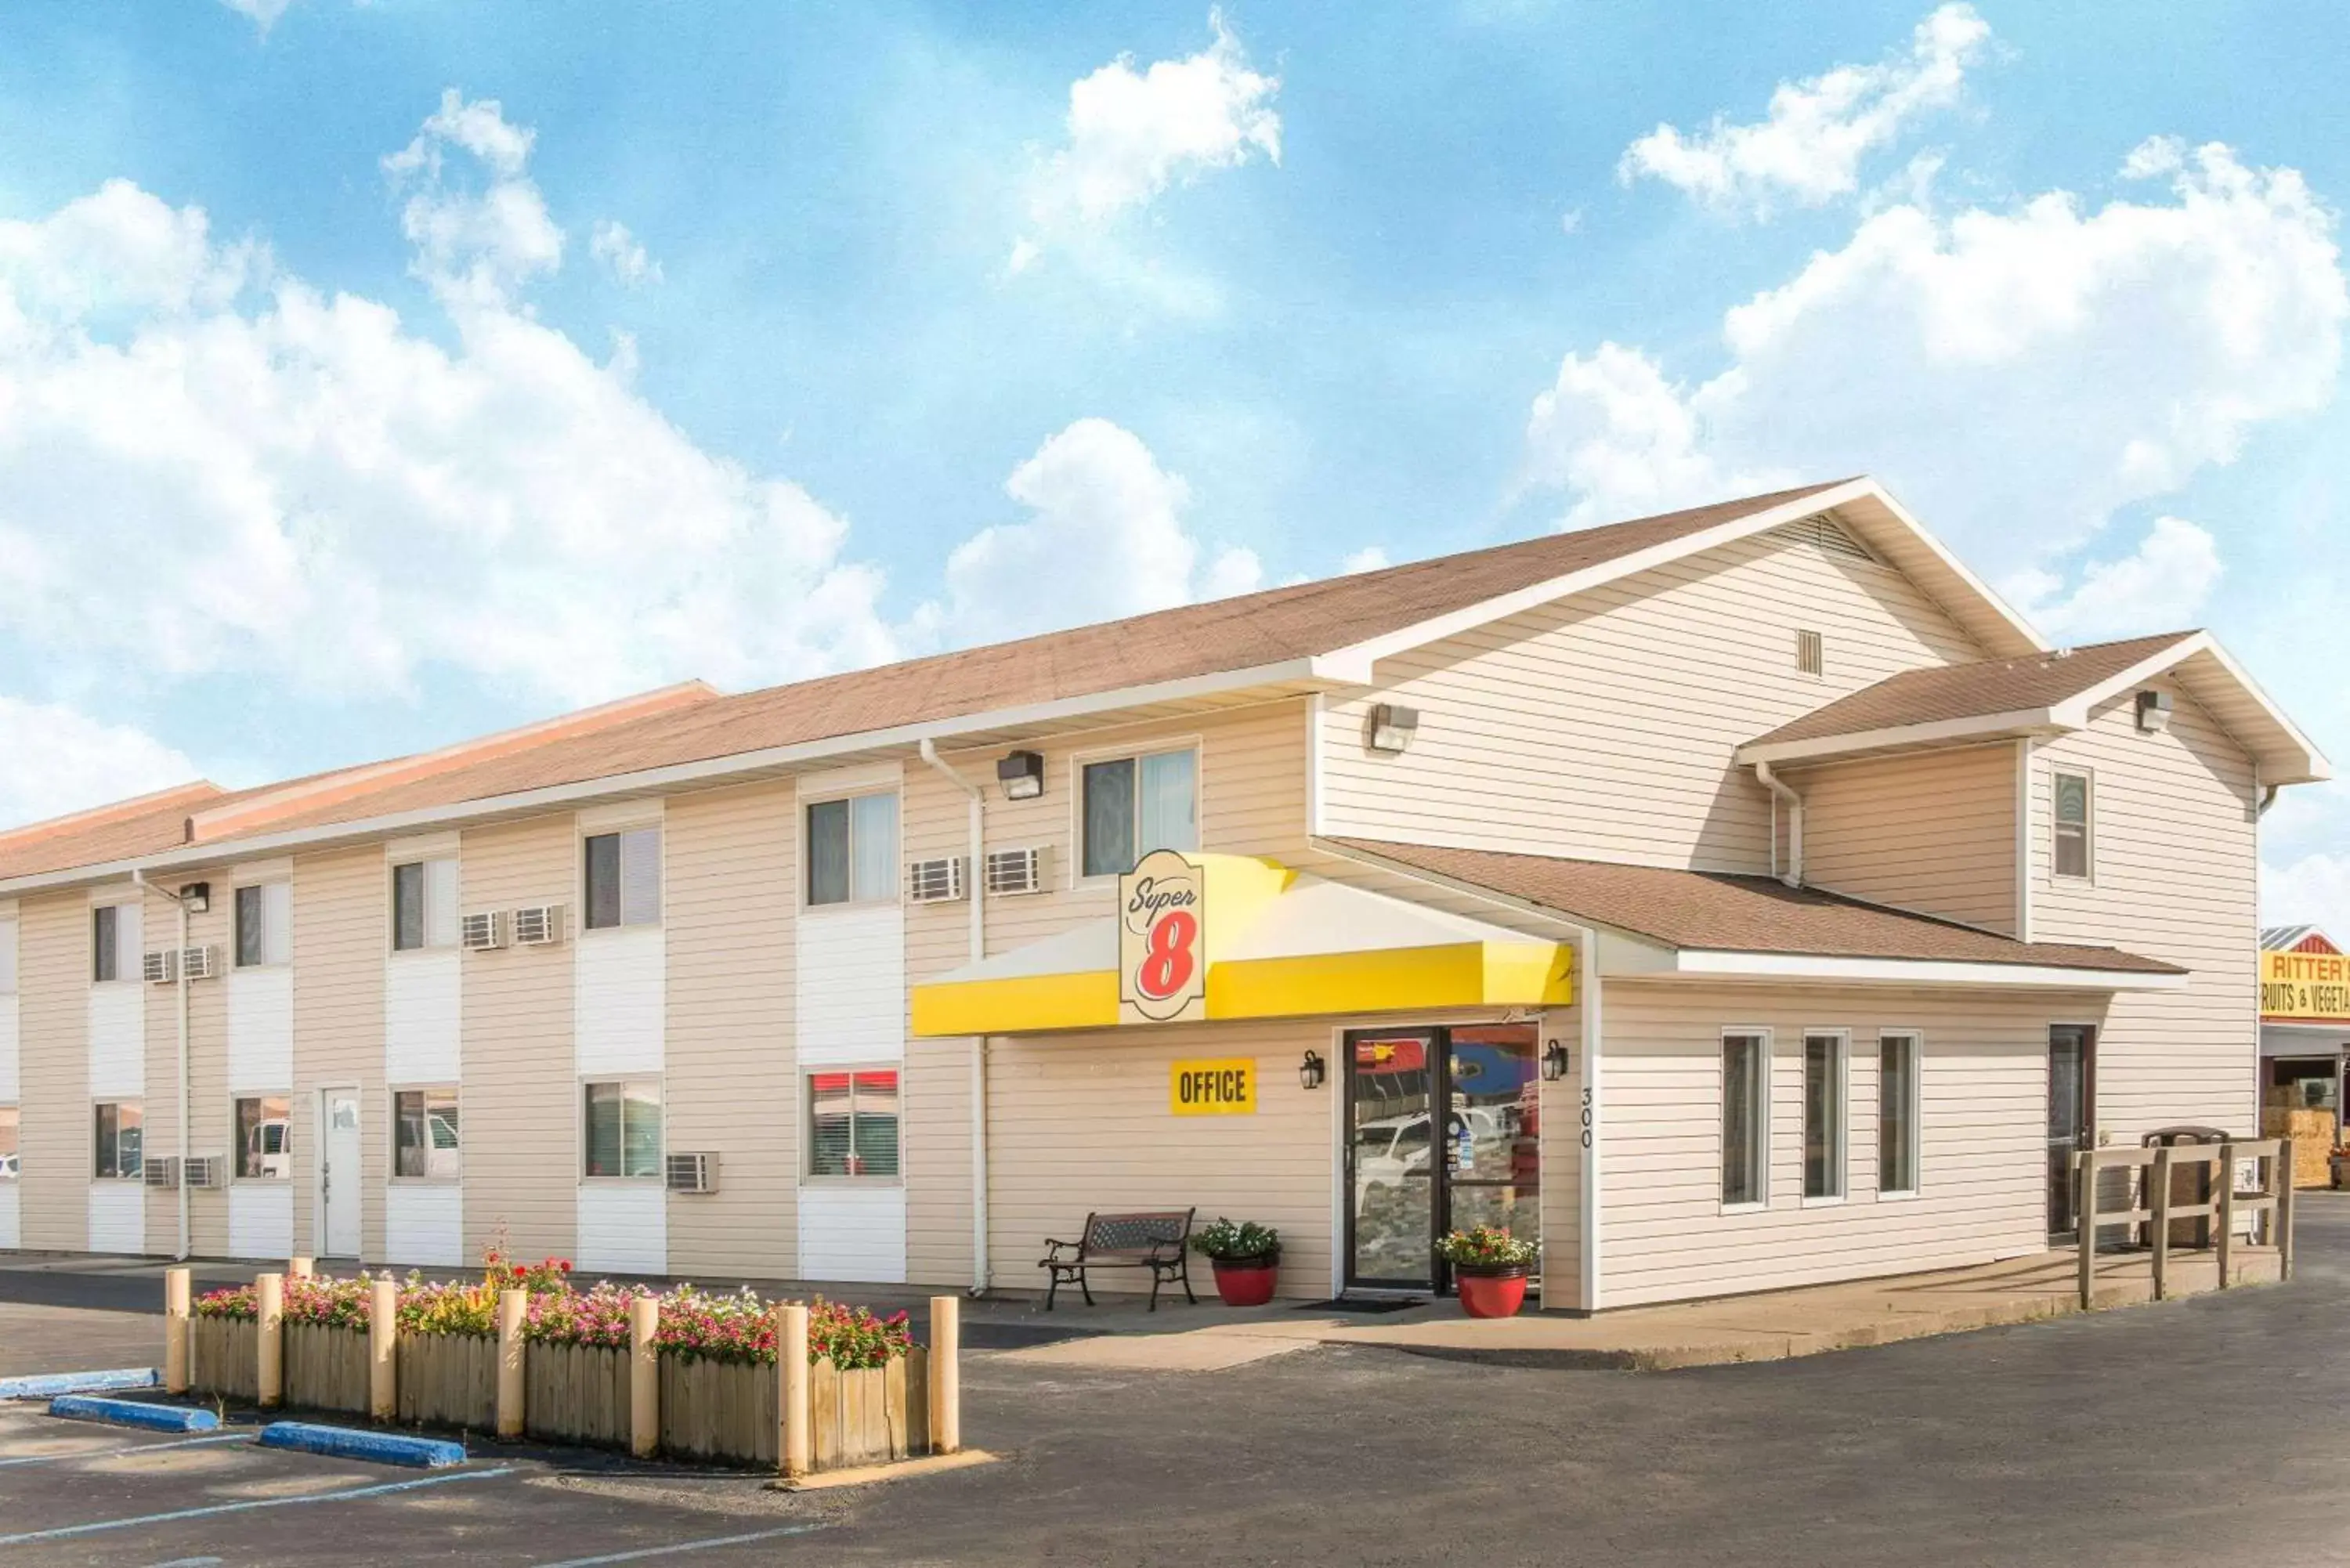 Property Building in Super 8 by Wyndham Moberly MO